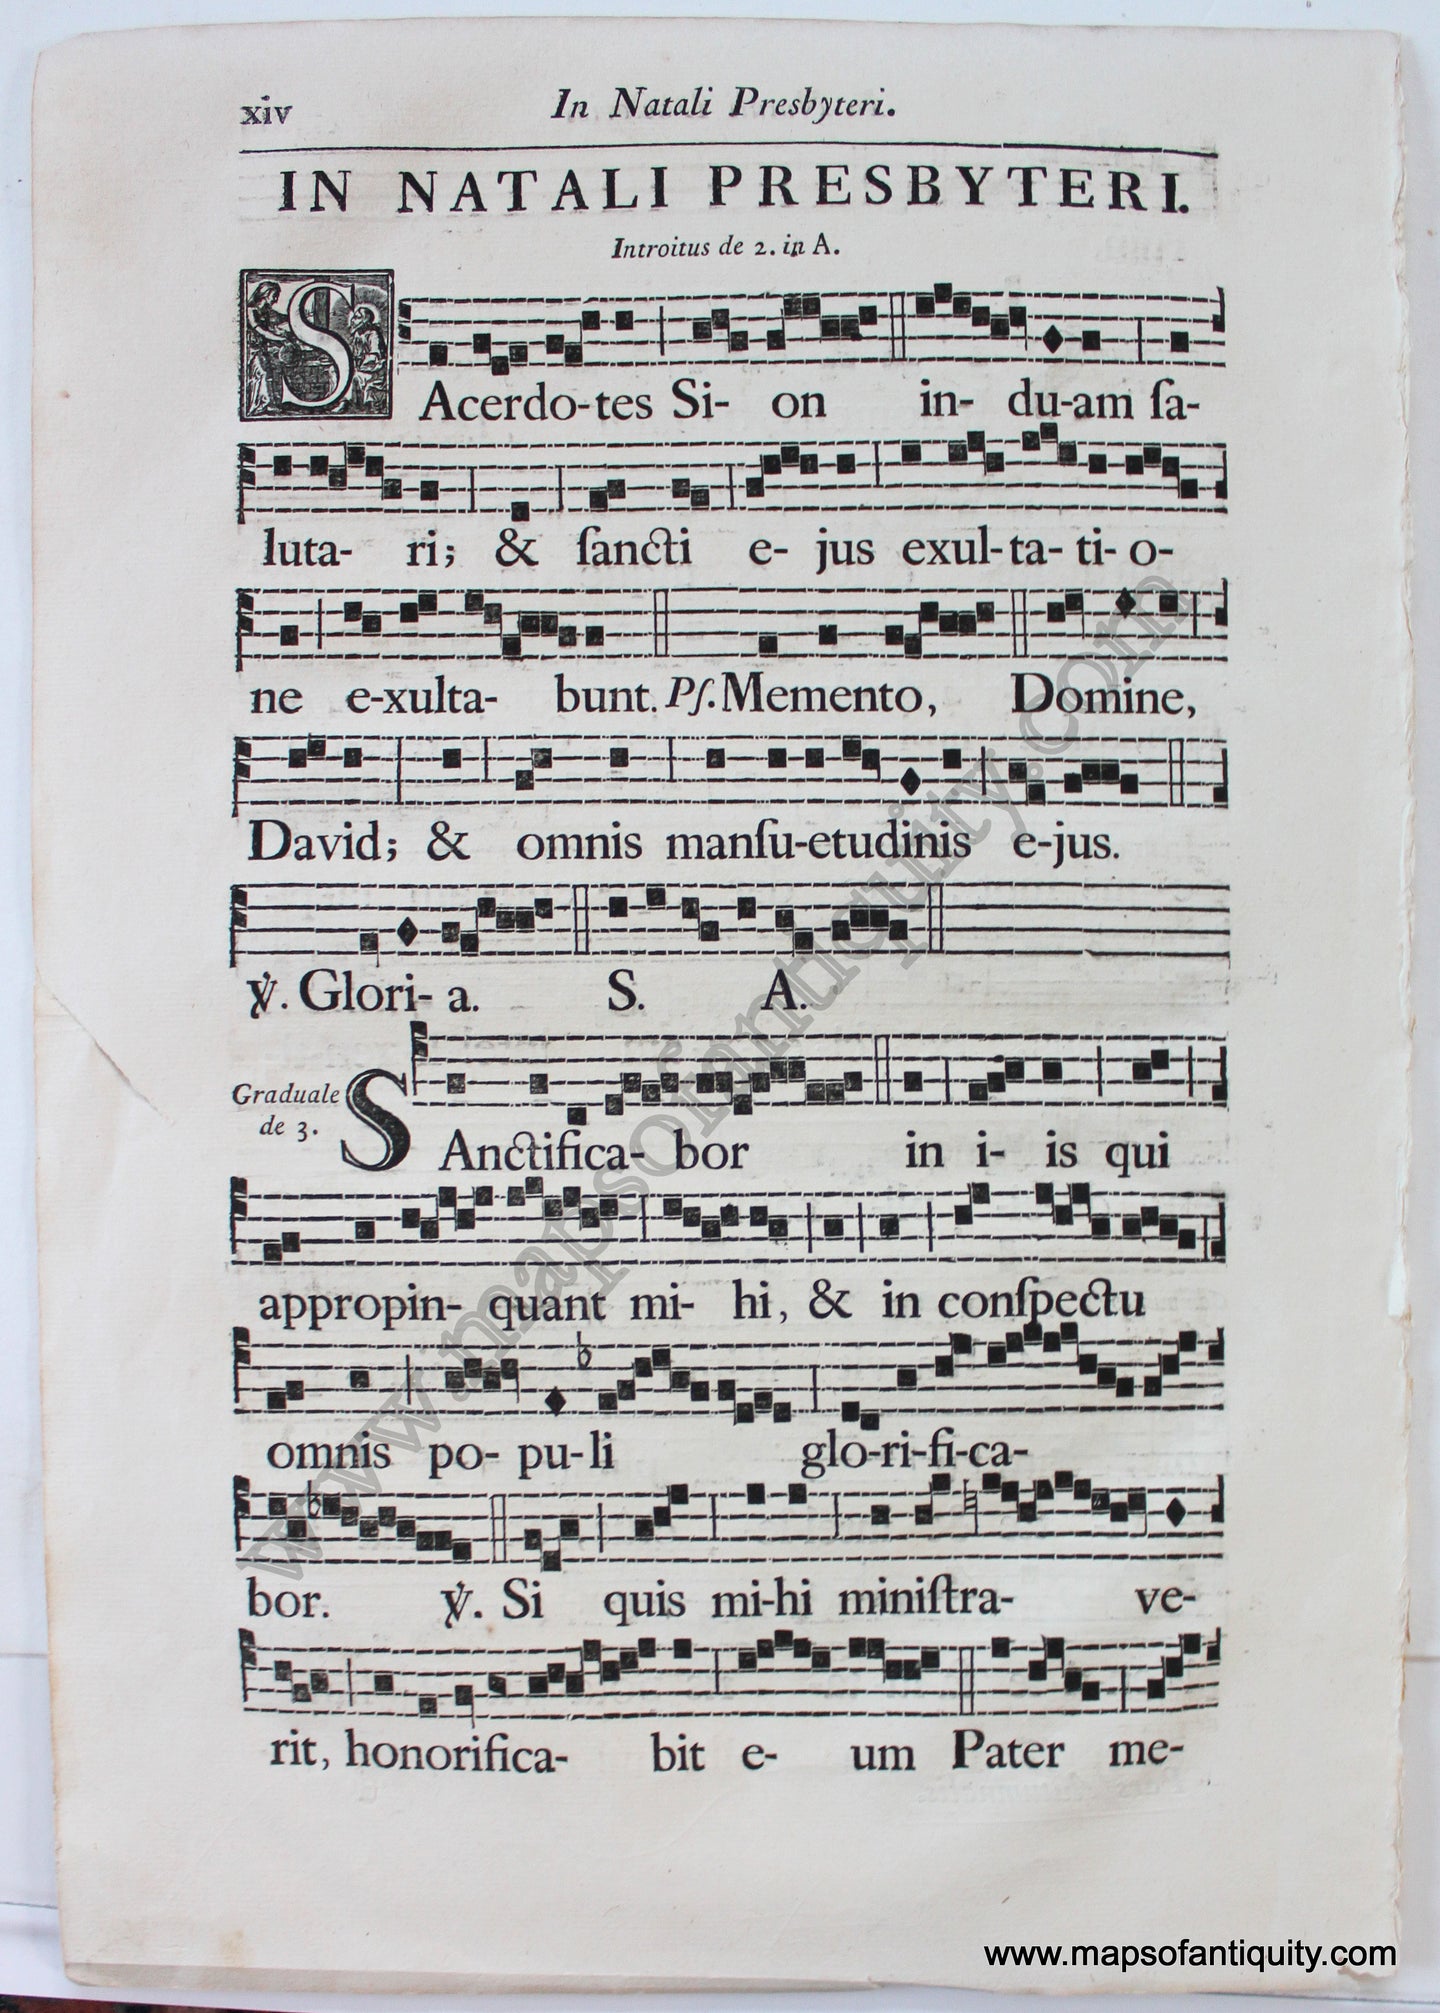 Antique-Sheet-Music-Woodblock-Printed-mid-18th-century-1700s-Maps-of-Antiquity